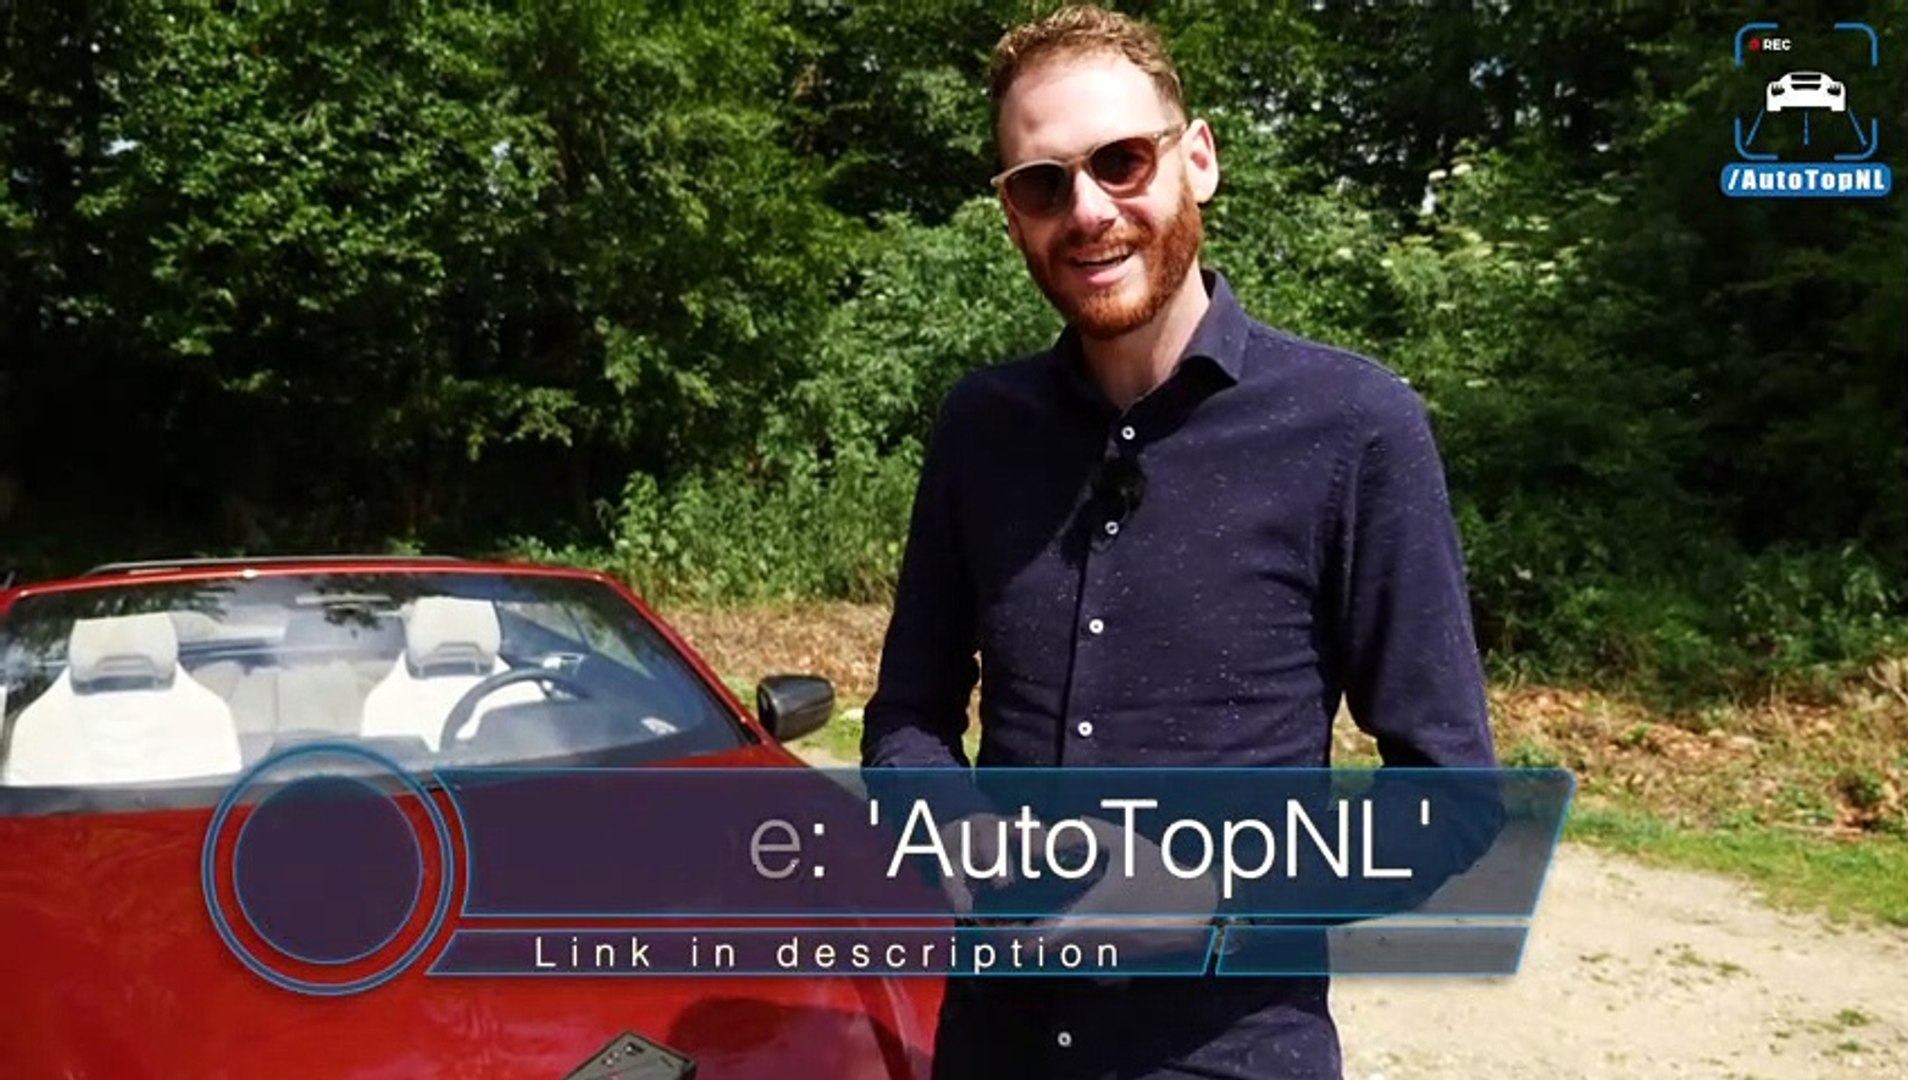 NEW! Mercedes AMG CLS 53 4Matic+ REVIEW on AUTOBAHN & ROAD by AutoTopNL